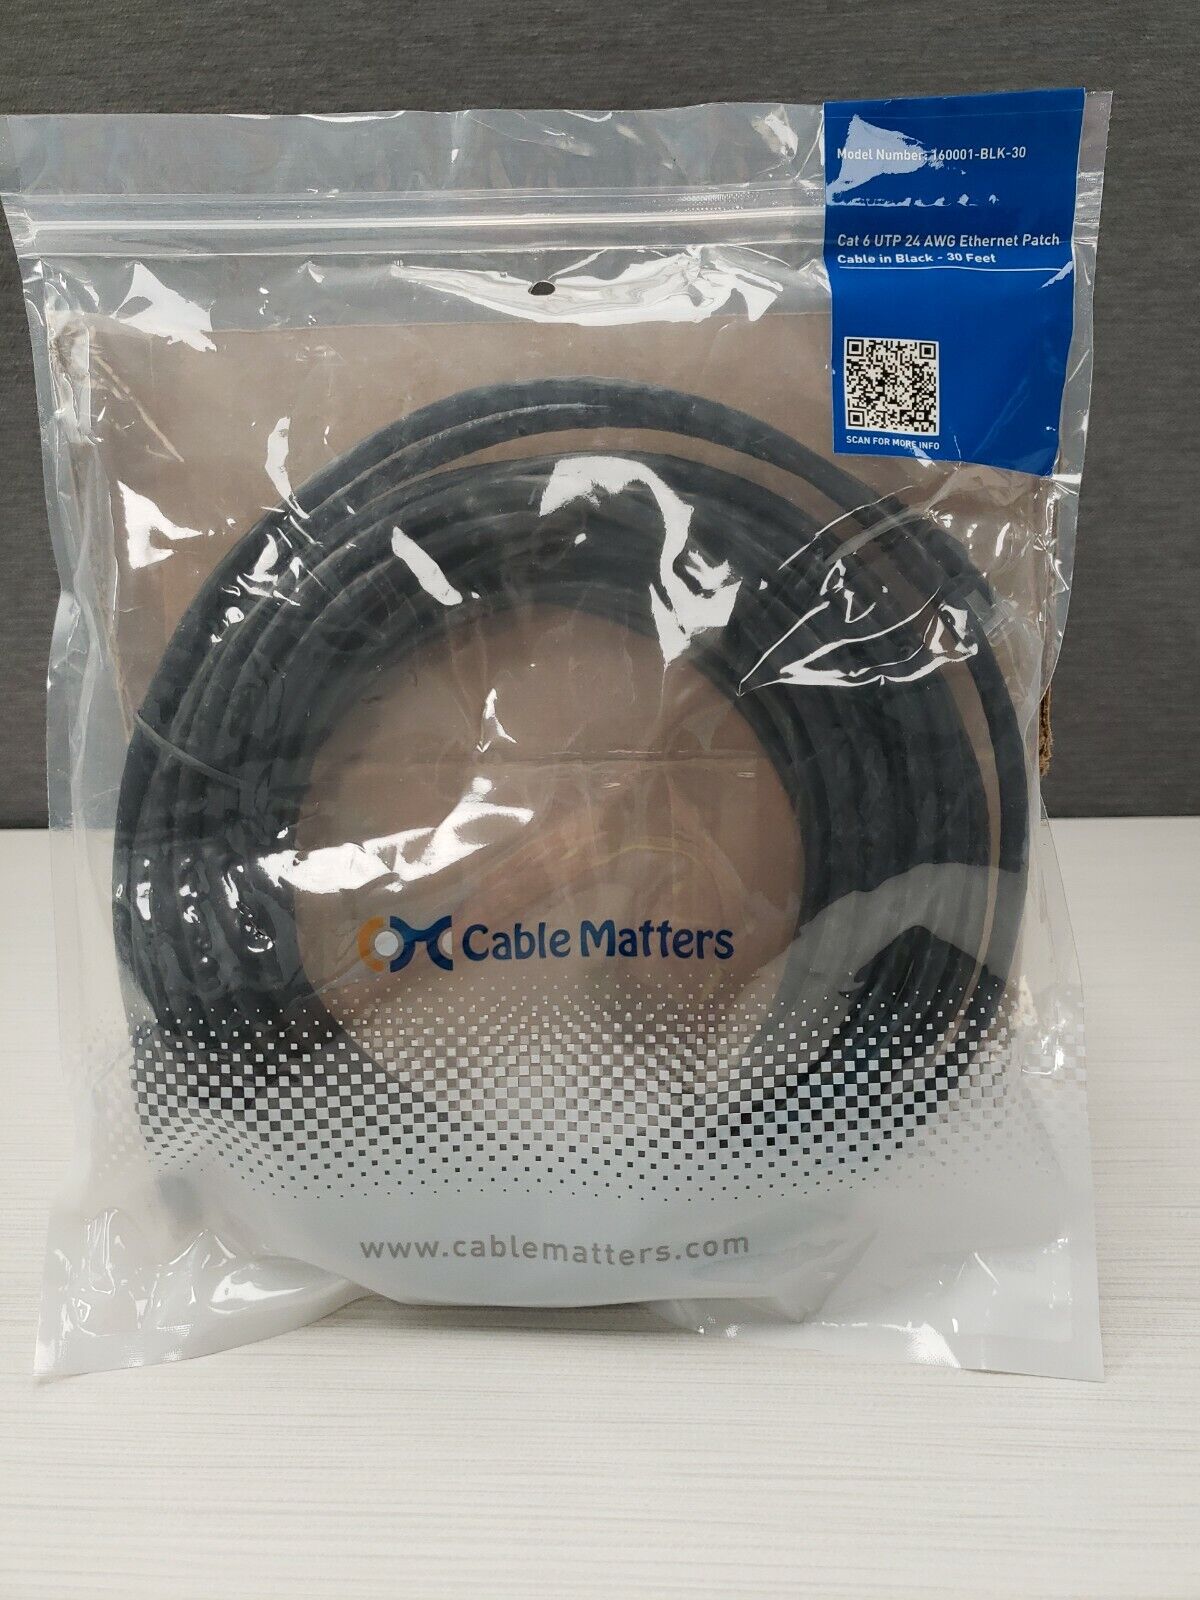 Cable Matters Cat 6 UTP 24 AWG Ethereal Patch Cable Black 30 Ft.